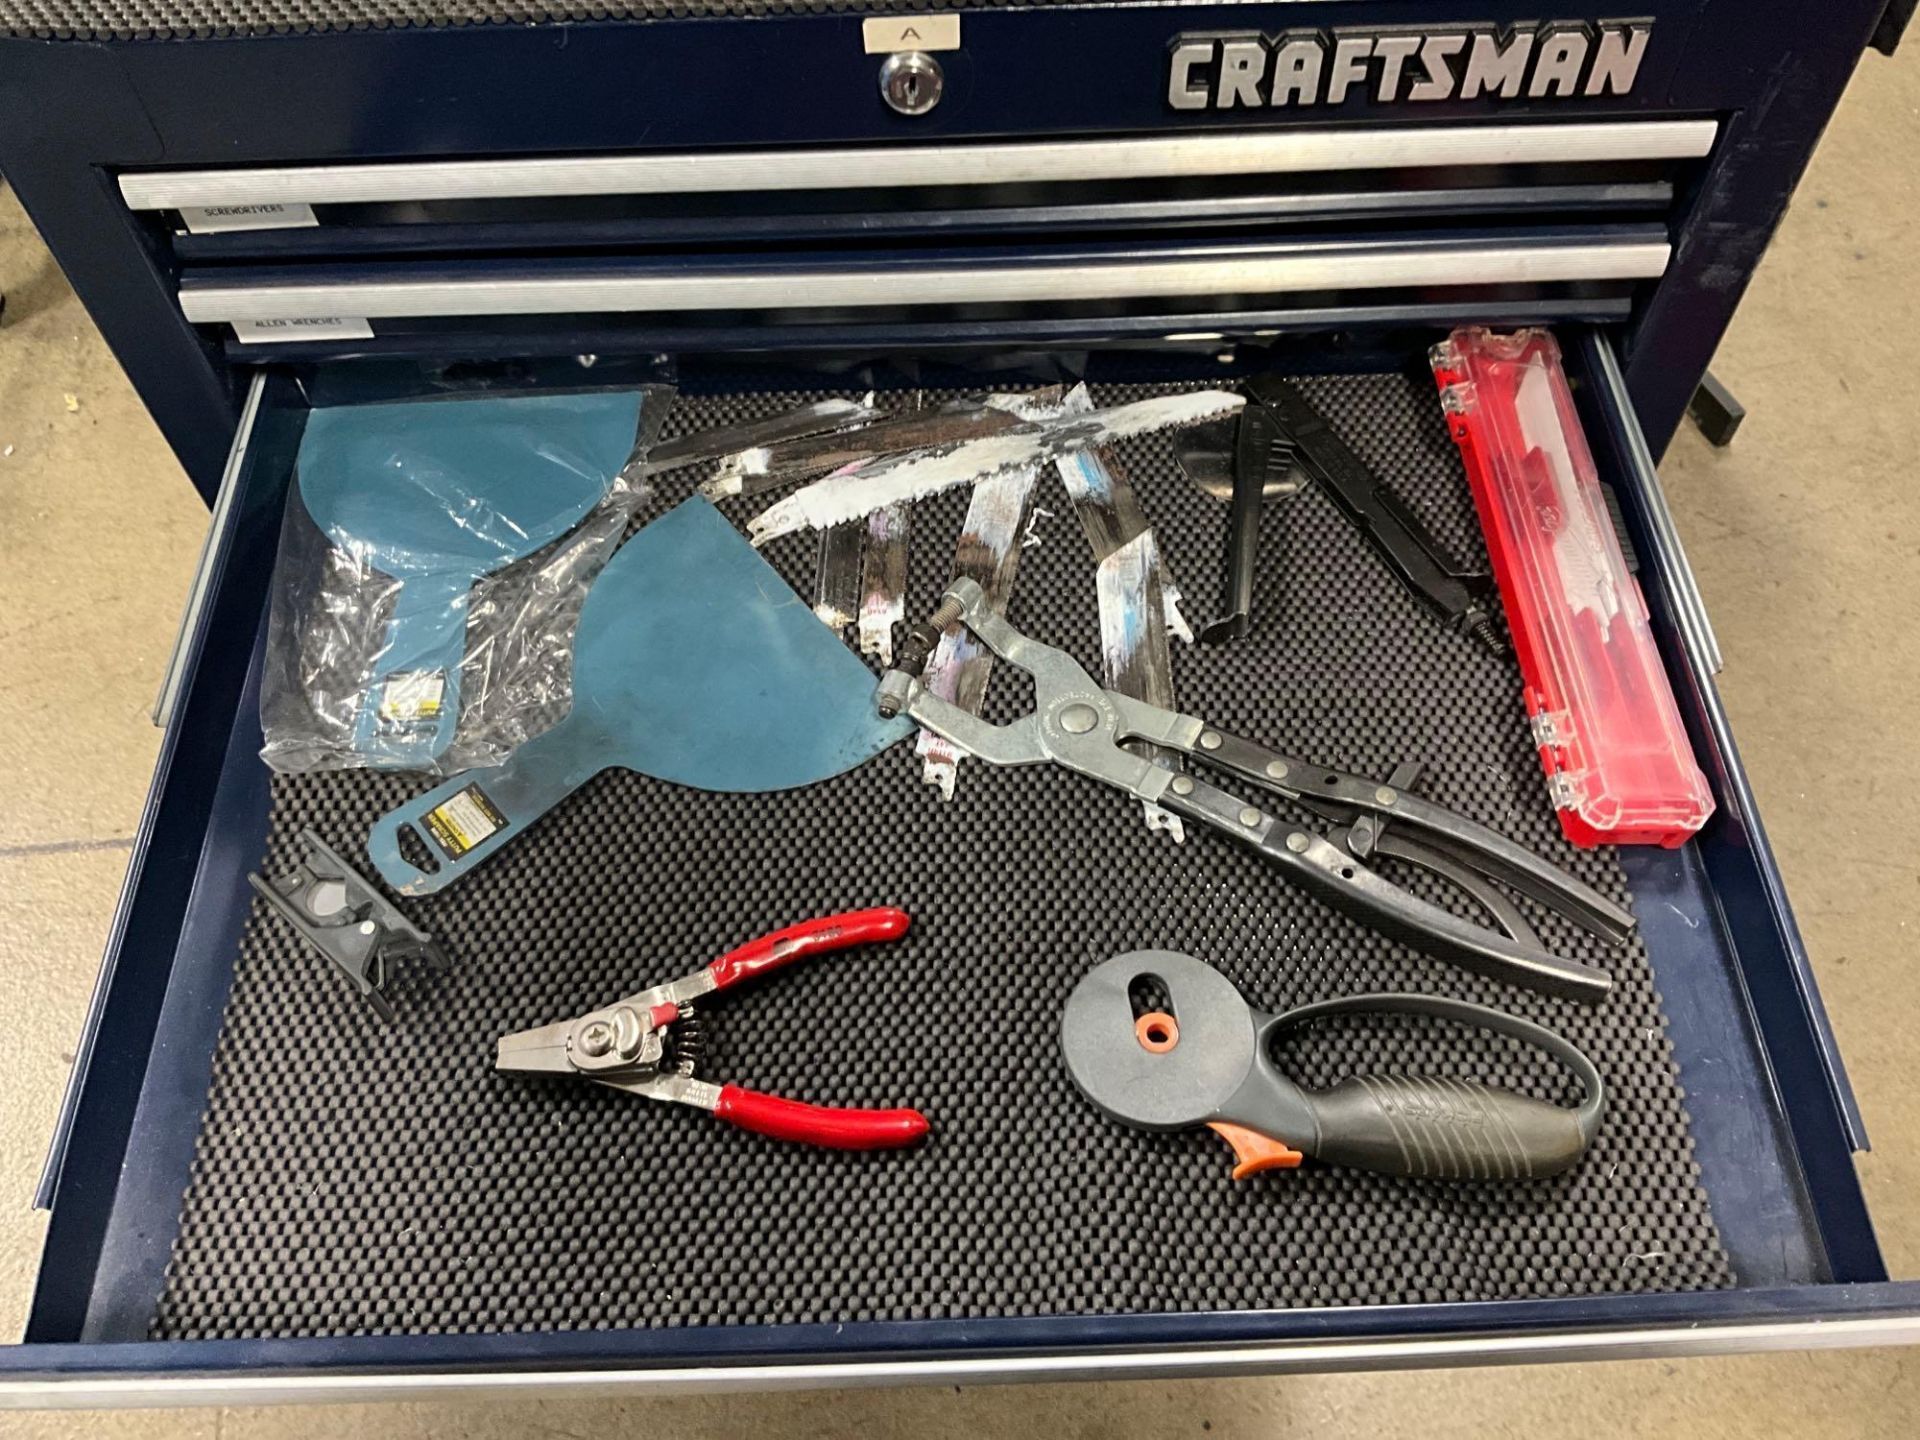 CRAFTSMAN TOOLBOX LOADED WITH TOOLS - Image 14 of 21